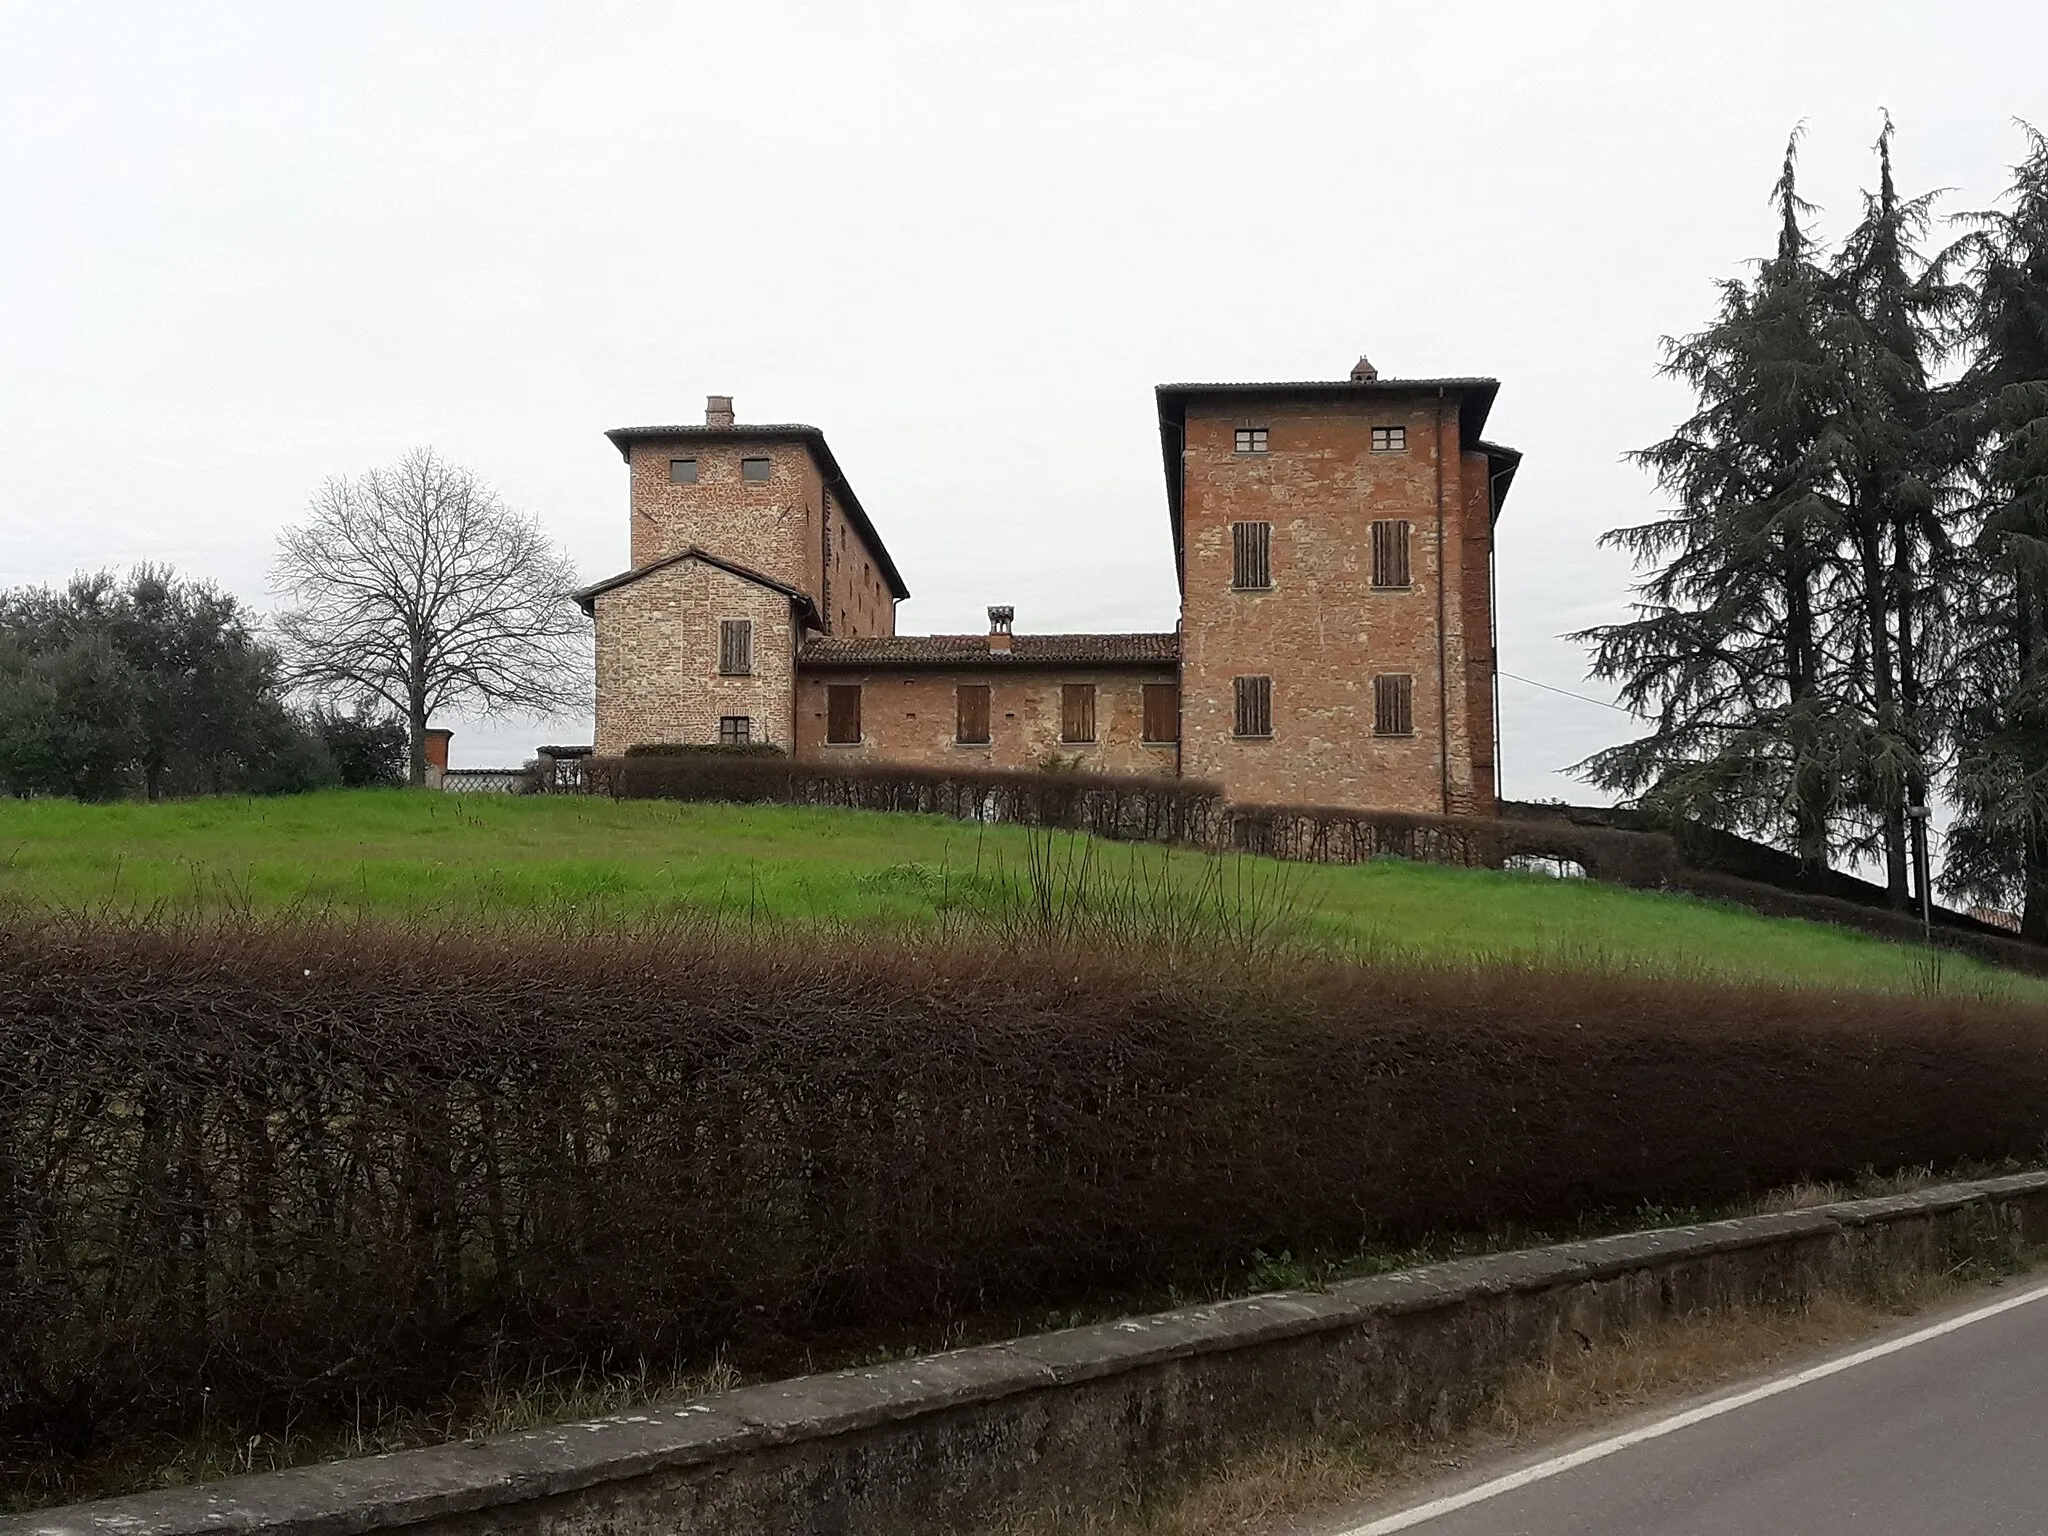 Photo showing: Side view of the castle of Seminò, municipality of Ziano Piacentino, Piacenza, Italy